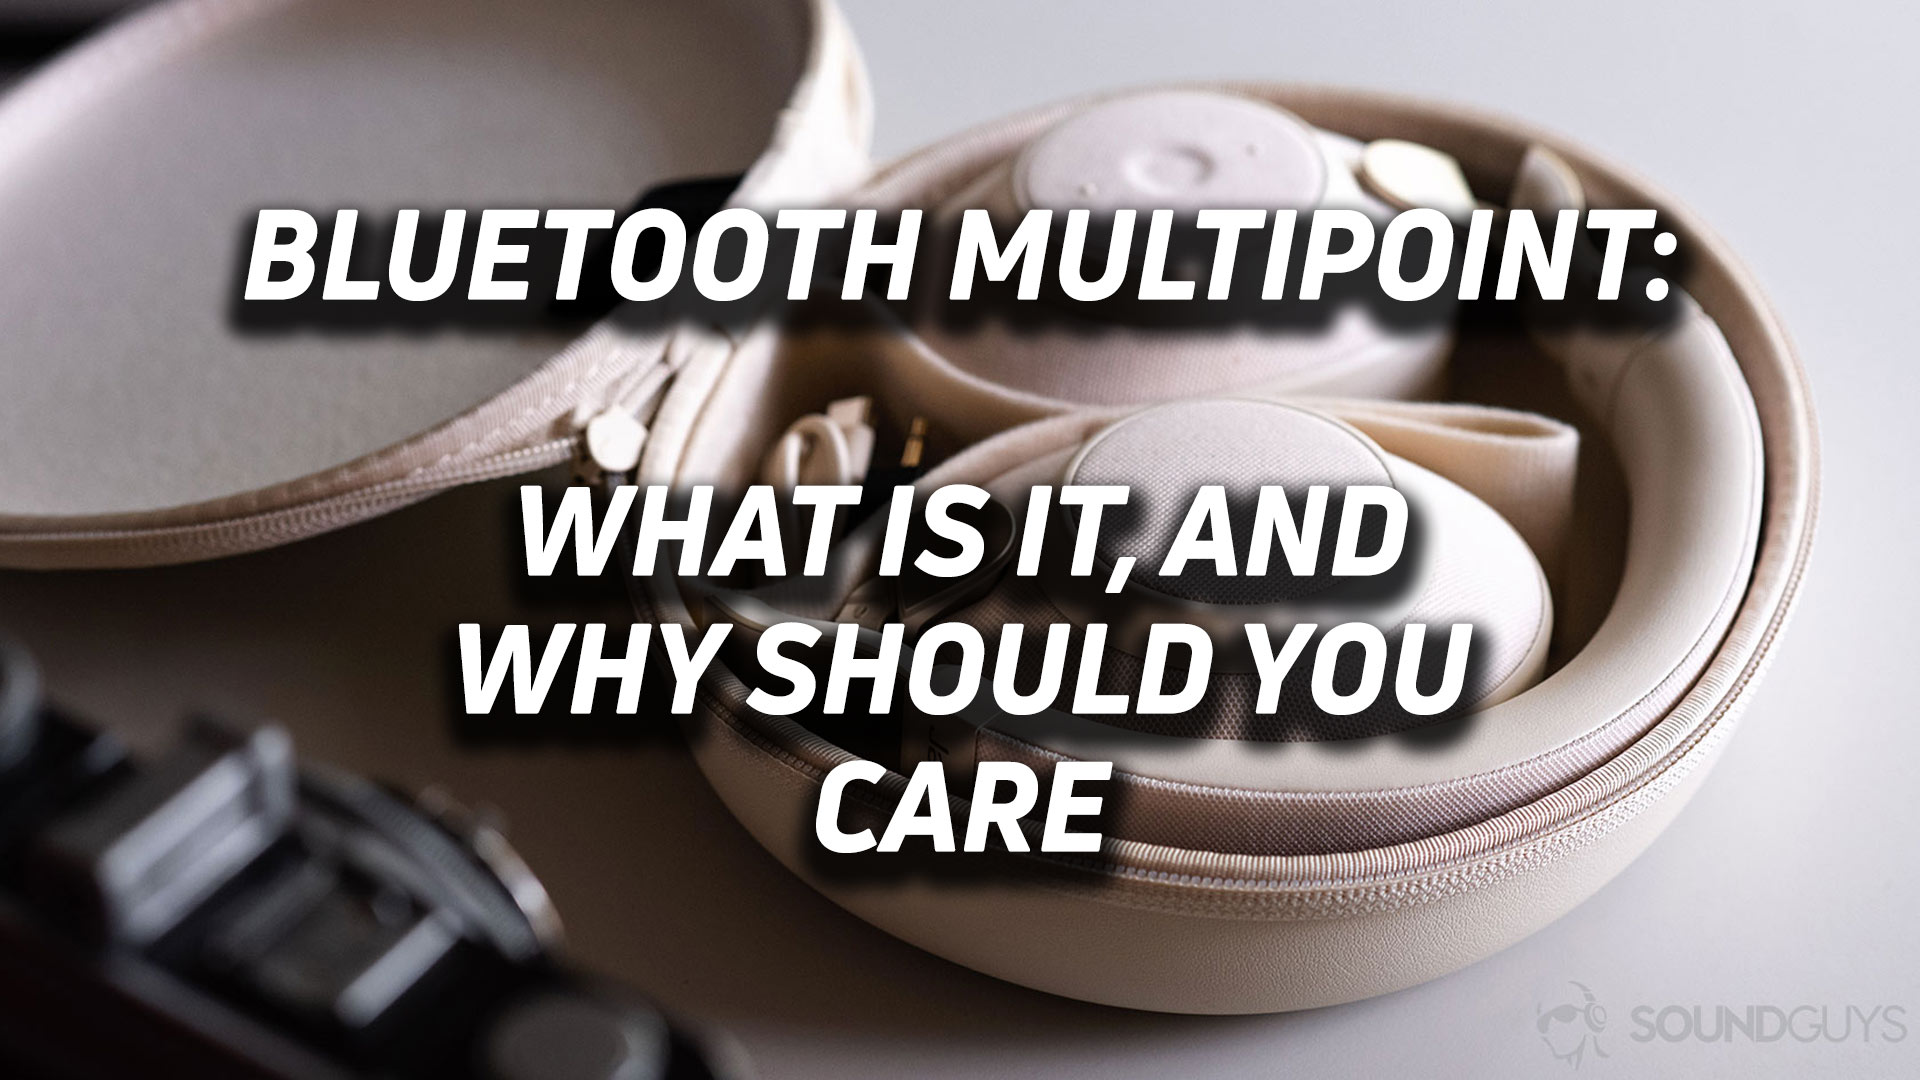 A picture of the Jabra Elite 85h headphones in beige with the text, "Bluetooth Multipoint: what is it, and why you should care" overlayed.